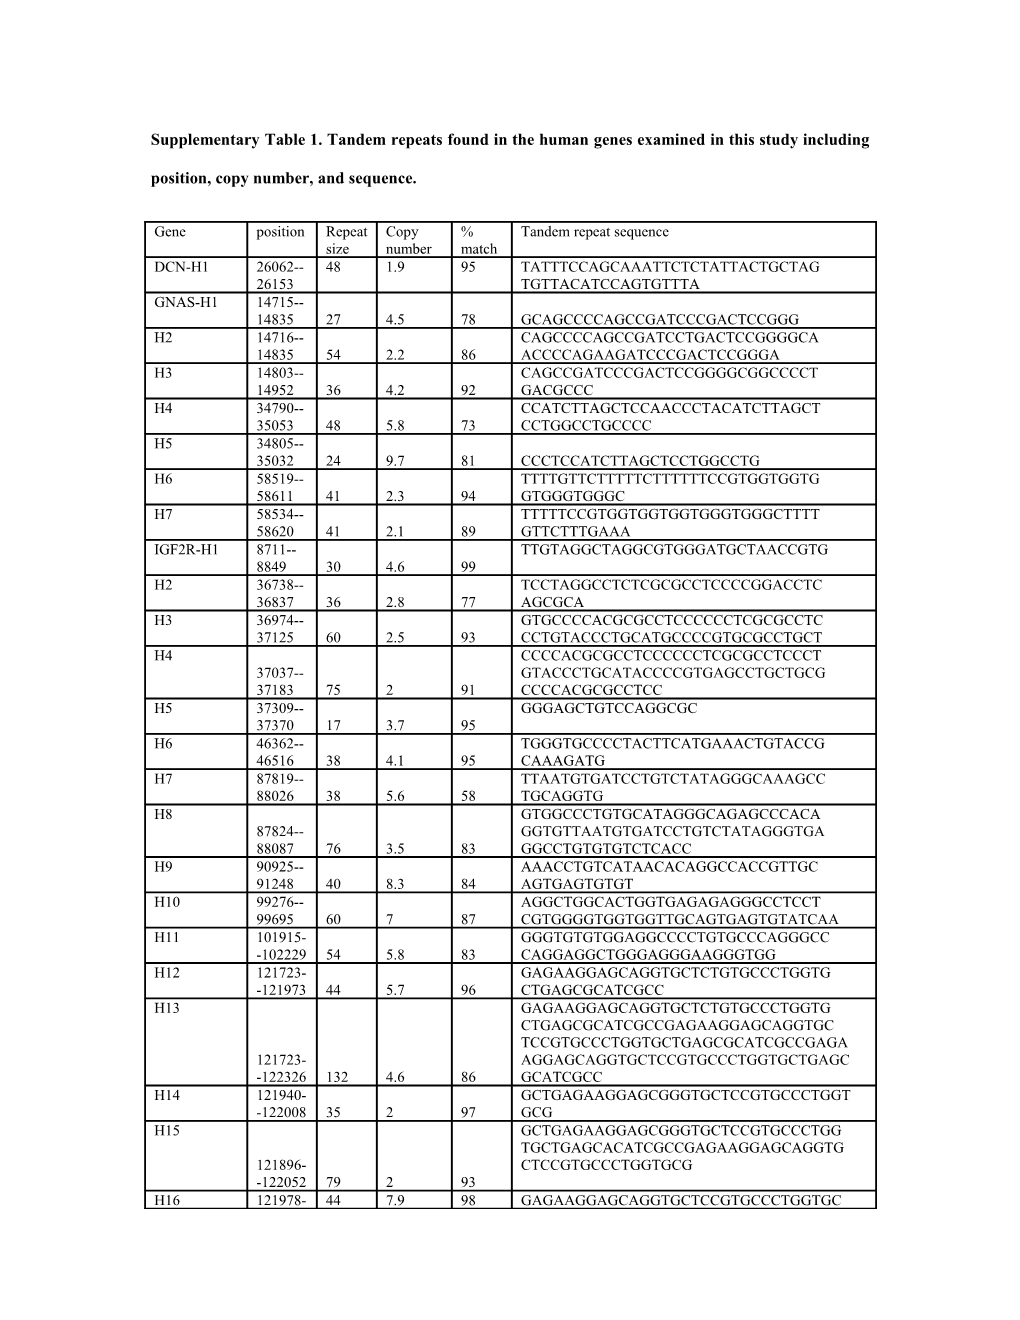 Supplementary Table 1. Tandem Repeats Found in the Human Genes Examined in This Study